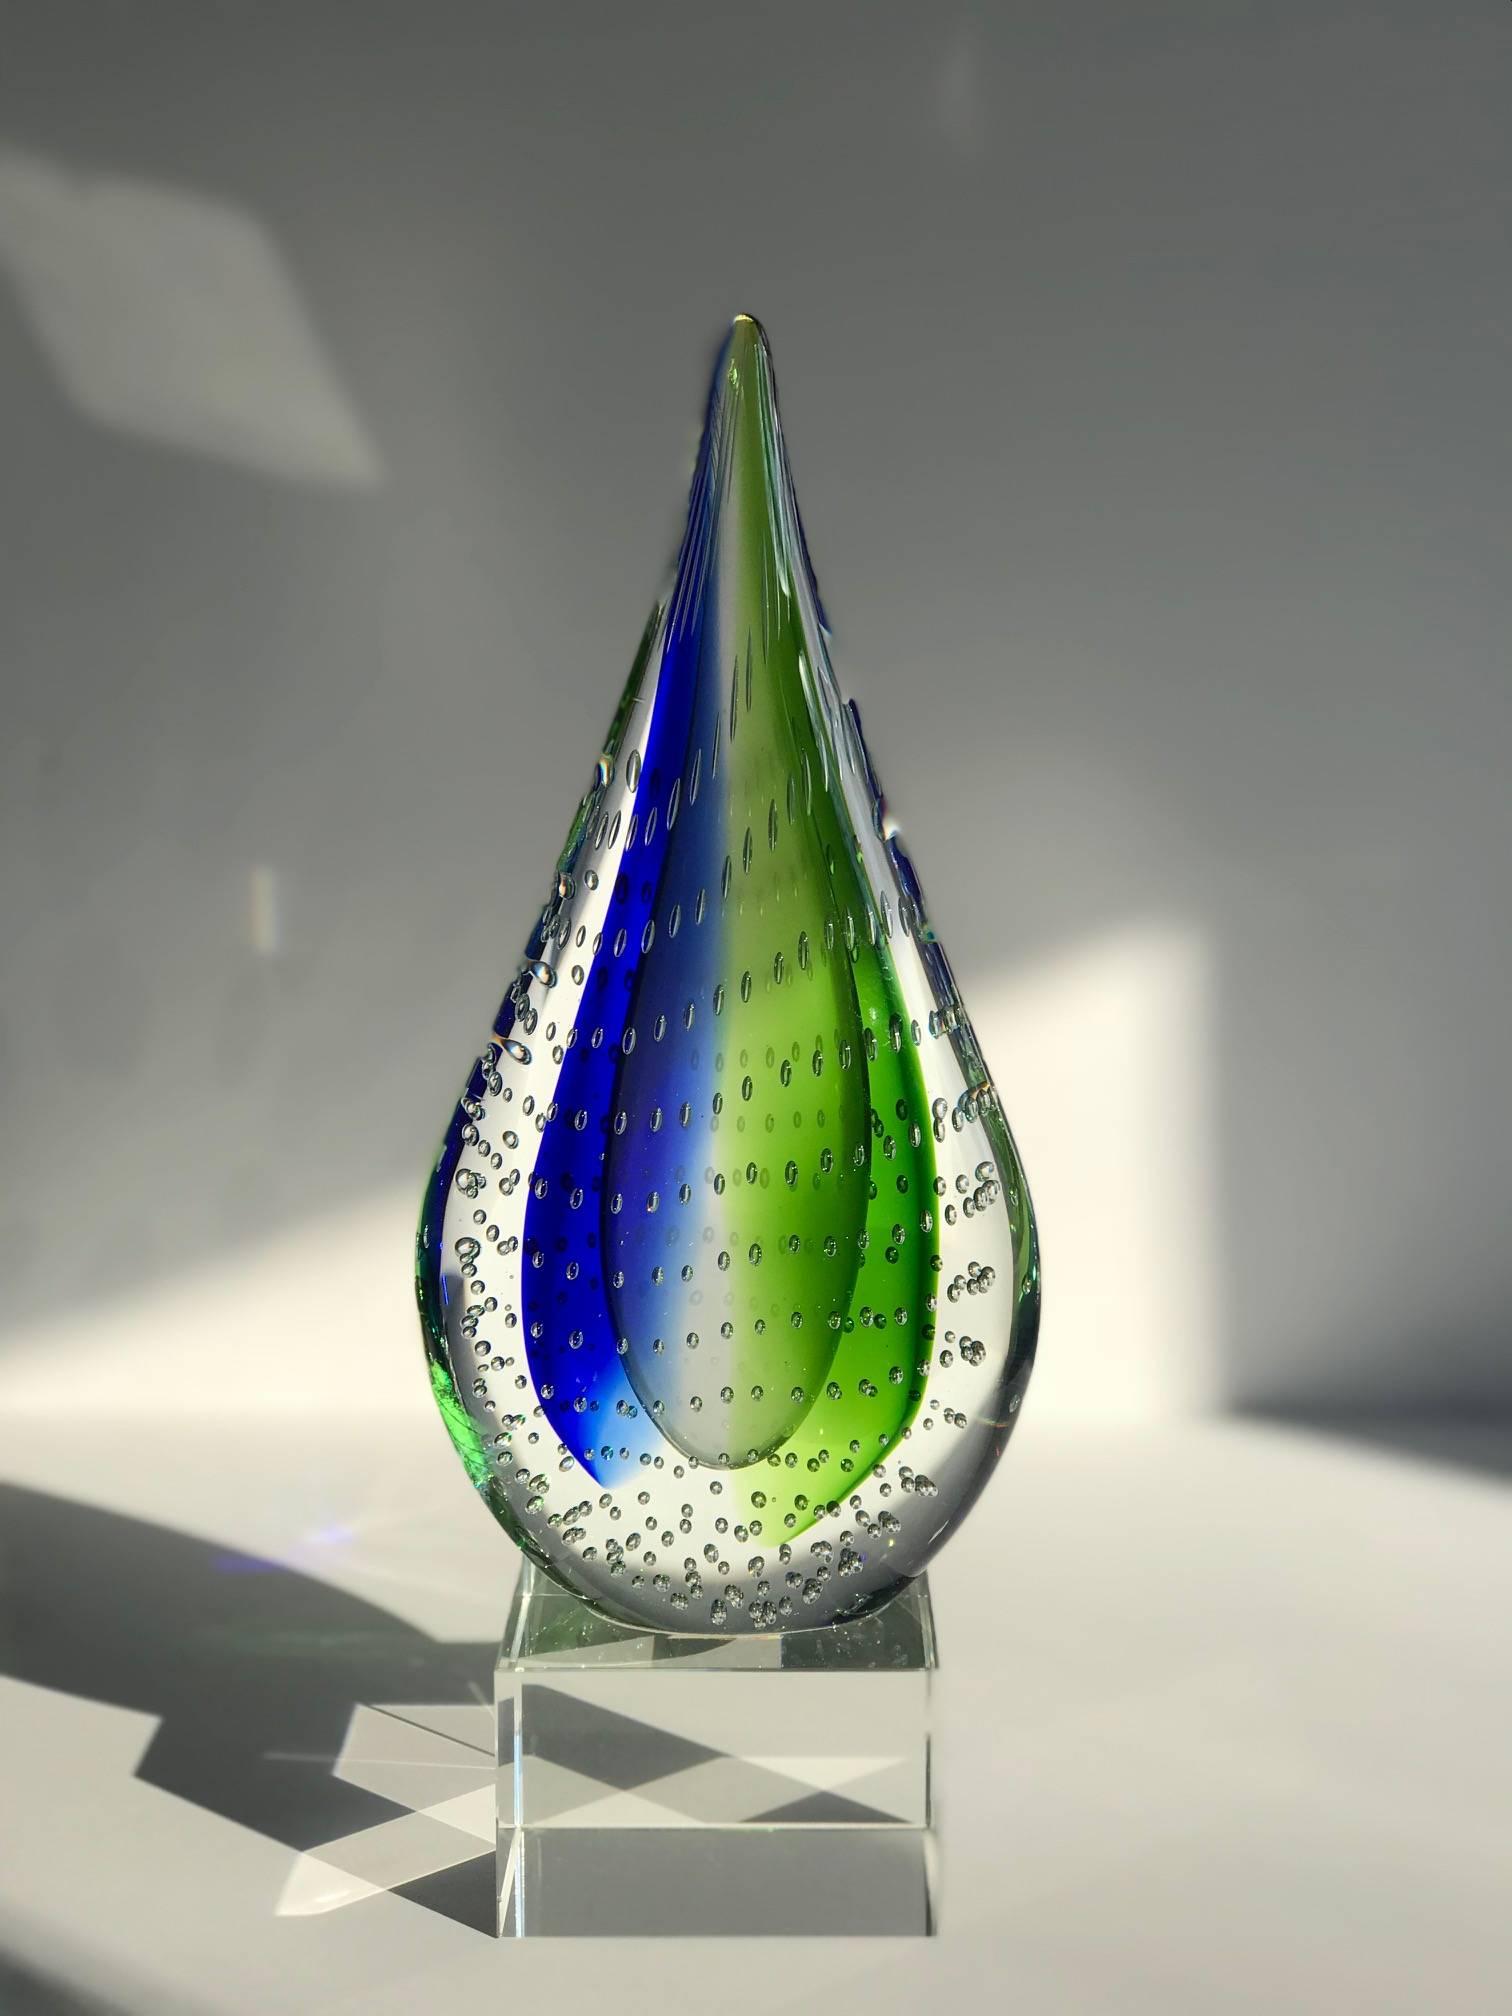 Teardrop sculpture made of Murano bubble glass with a lucite pedestal base. Features Sommerso technique whereby vibrant colors of green and blue glass are submerged within clear blown glass. Can be used as decorative sculpture, or as a bookend or